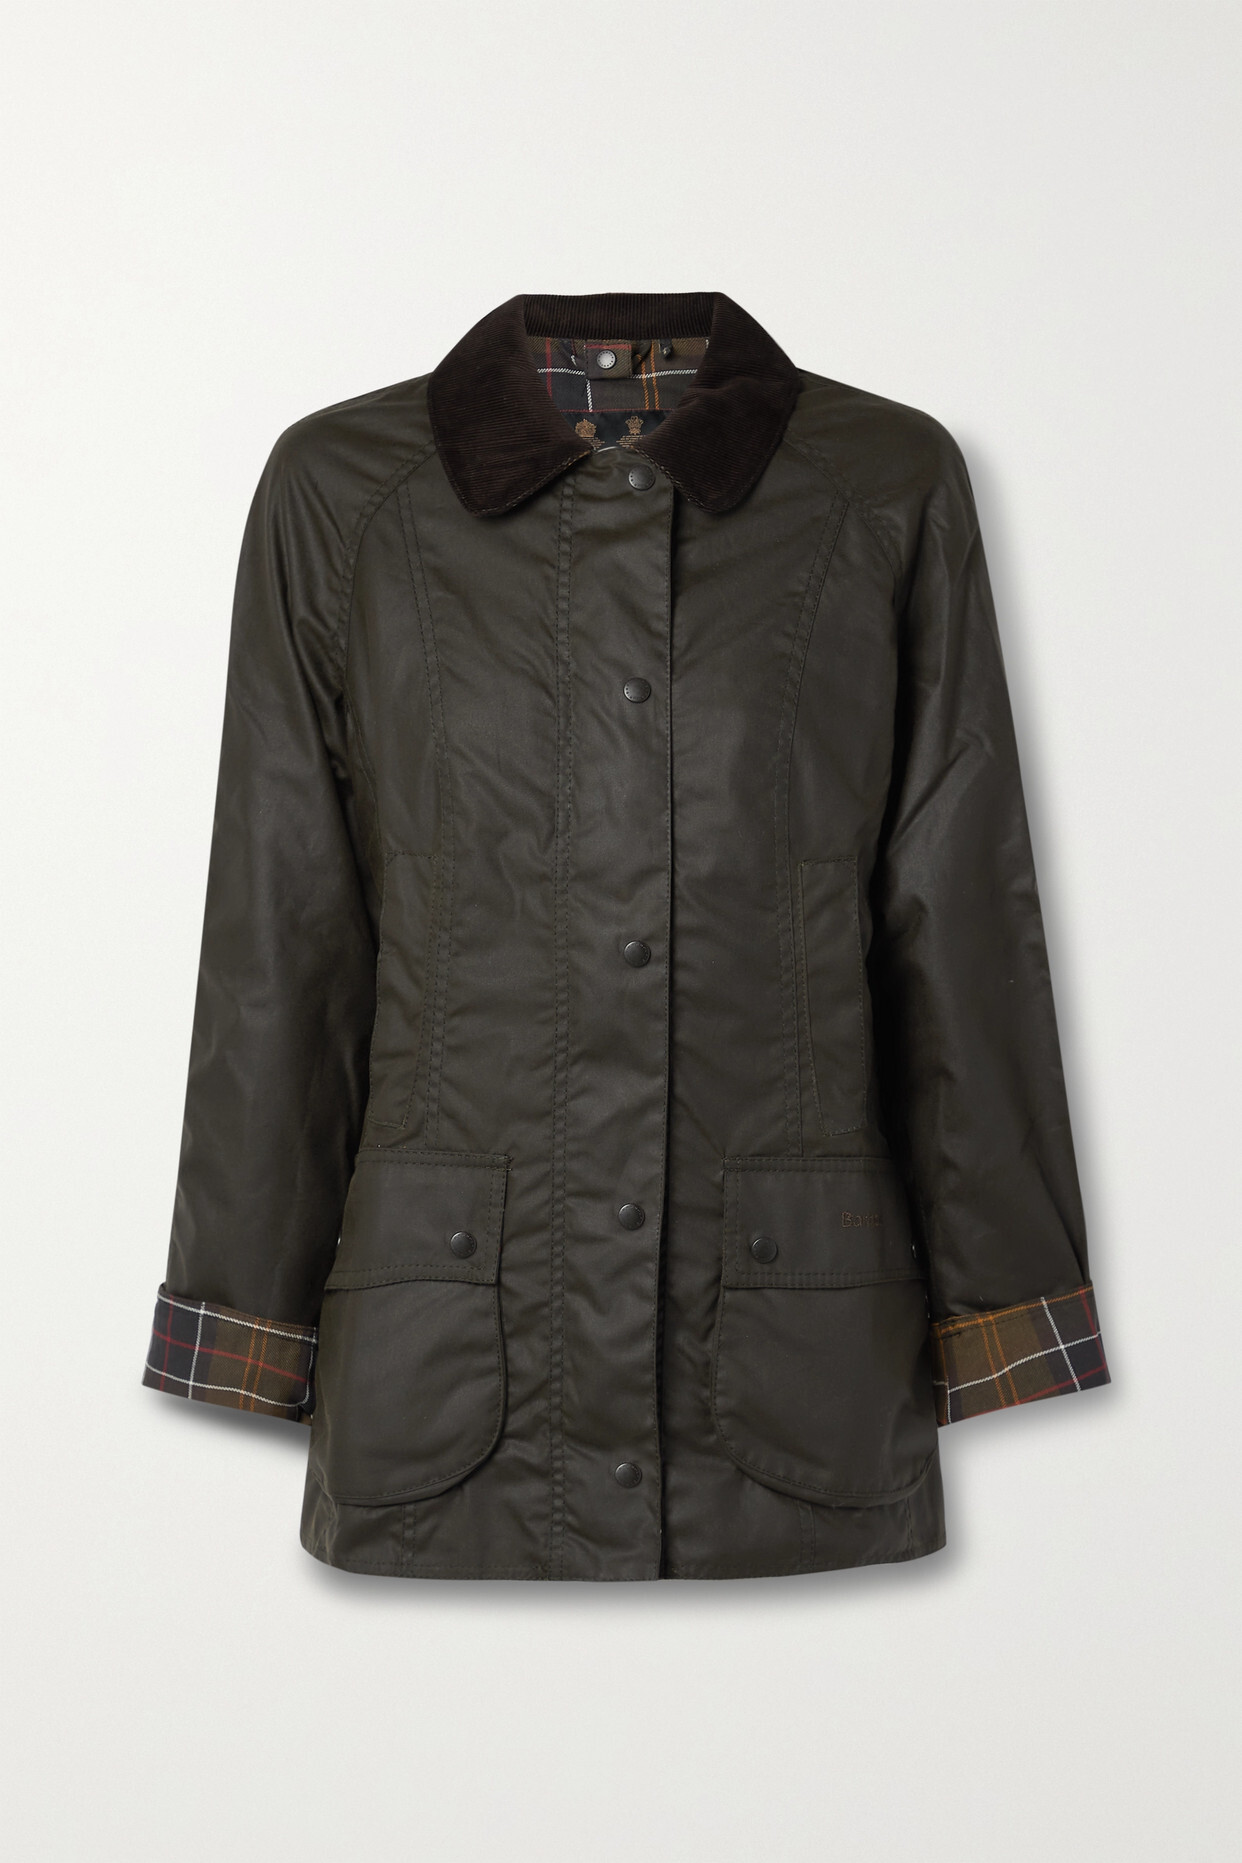 Barbour - Beadnell Corduroy-trimmed Waxed-cotton Jacket - Green